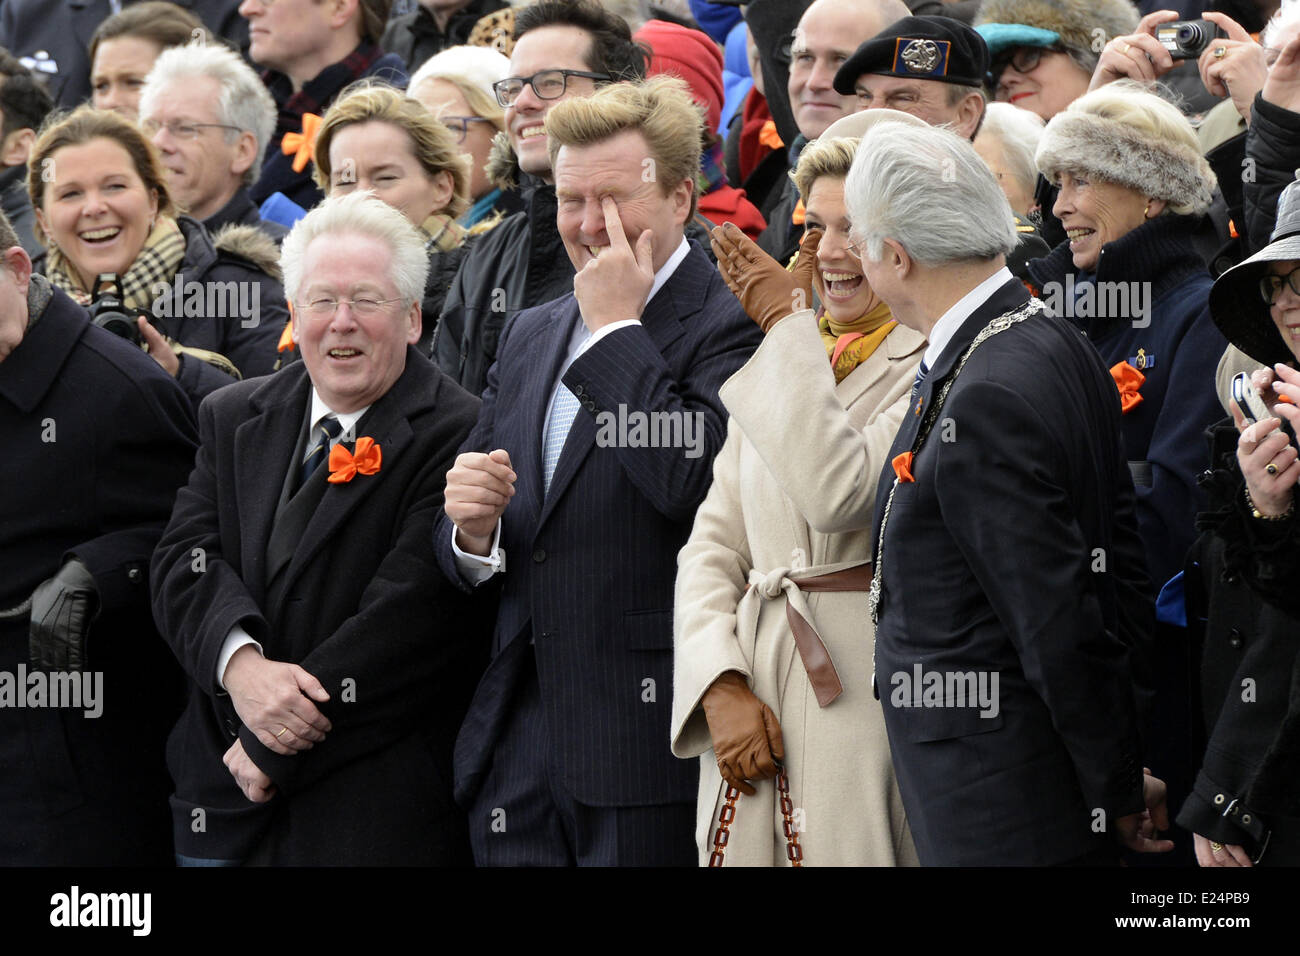 King Willem-Alexander of the Netherlands, Queen Maxima of the Netherlands attending a re-enactment of the historic landing of Prince Willem Frederik, later King William I, in the coastal district of Scheveningen.  Featuring: King Willem Alexander,Queen Maxima Where: Scheveningen, Netherlands When: 01 Dec 2013 Stock Photo